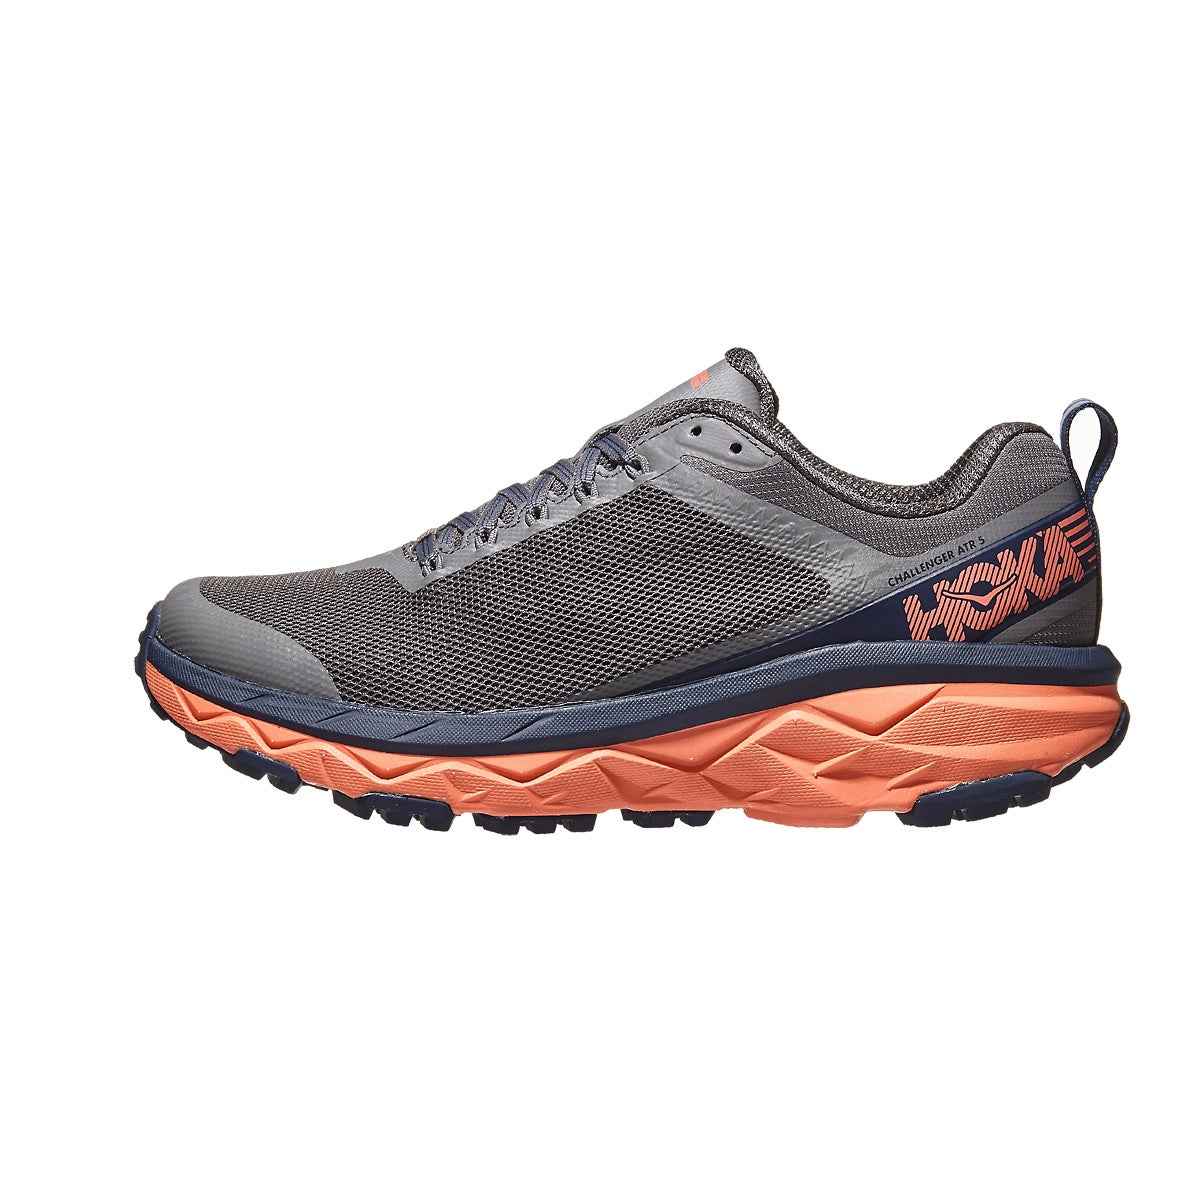 HOKA ONE ONE Challenger ATR 5 Women's Shoes Charcoal Gy 360° View ...